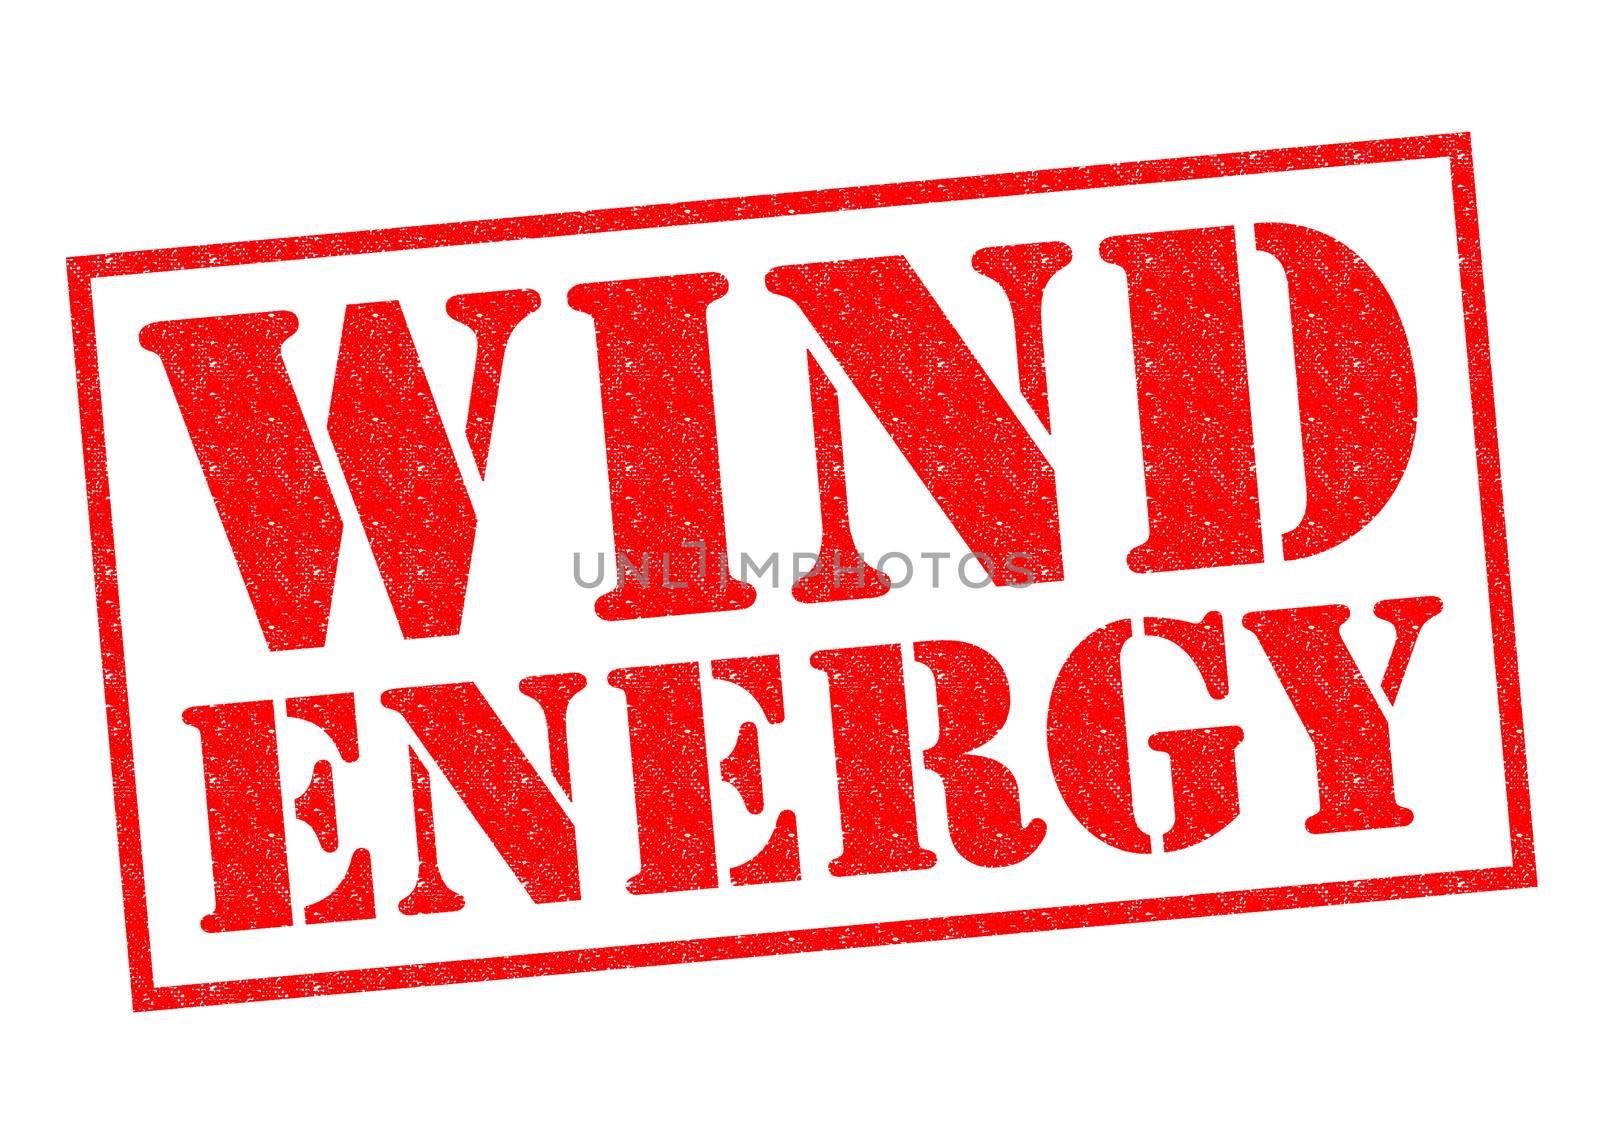 WIND ENERGY red Rubber Stamp over a white background.